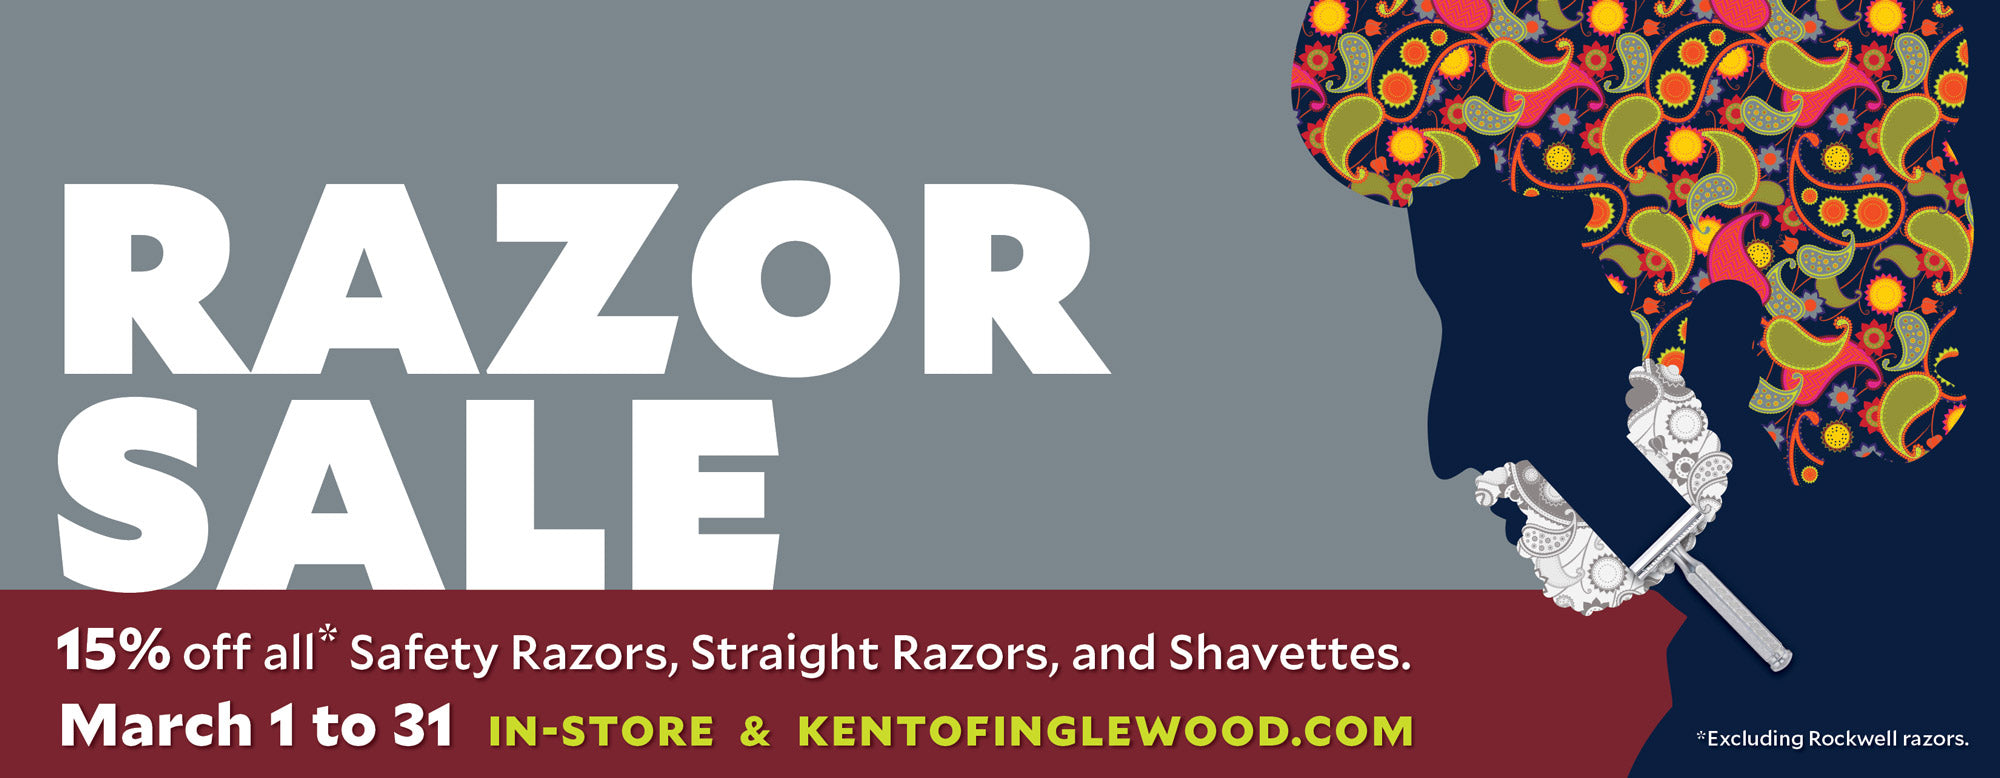 15% off Straight Razors, Safety Razors & Shavettes During March!